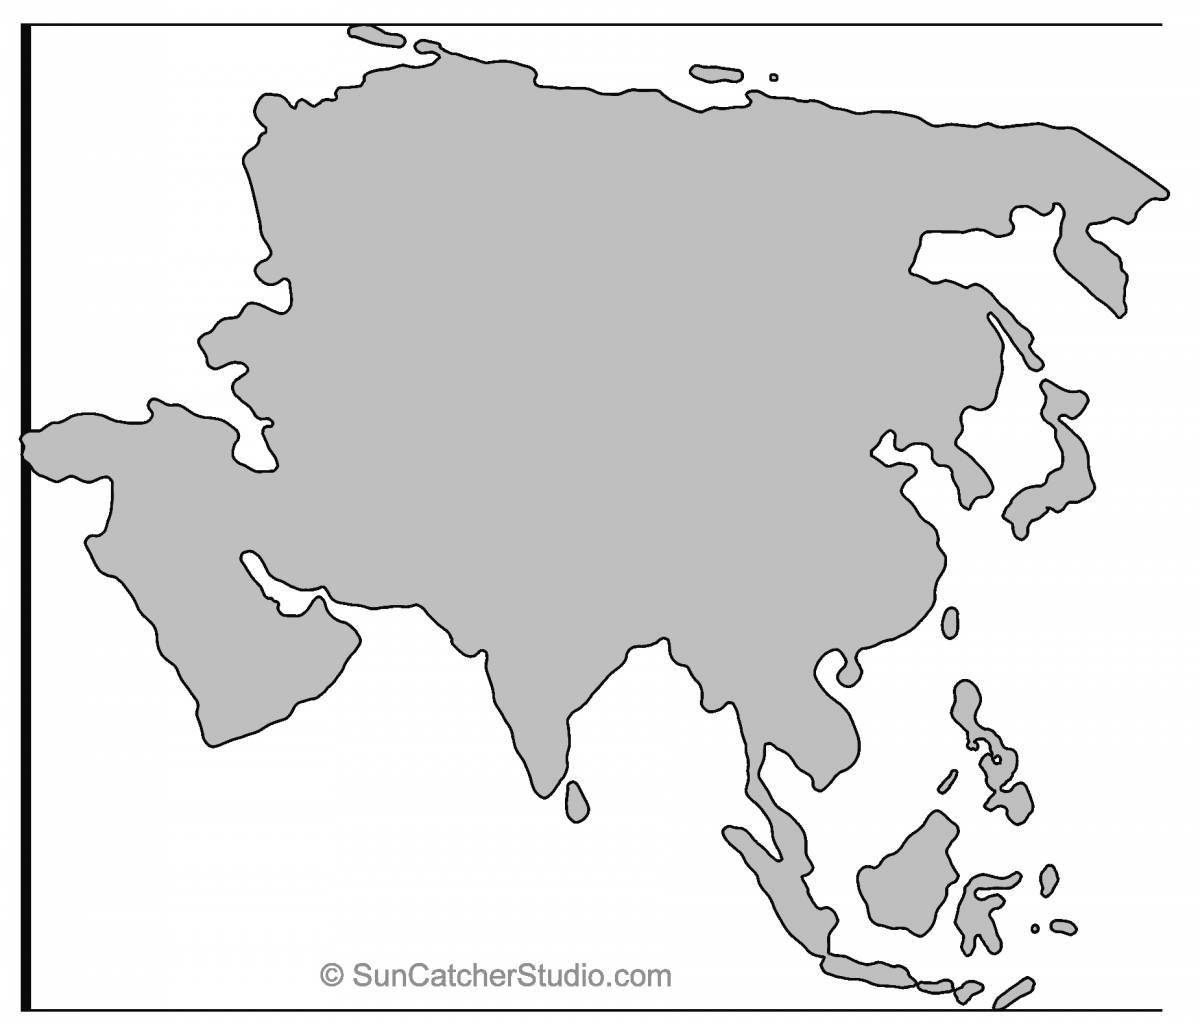 Eurasia animated map coloring page